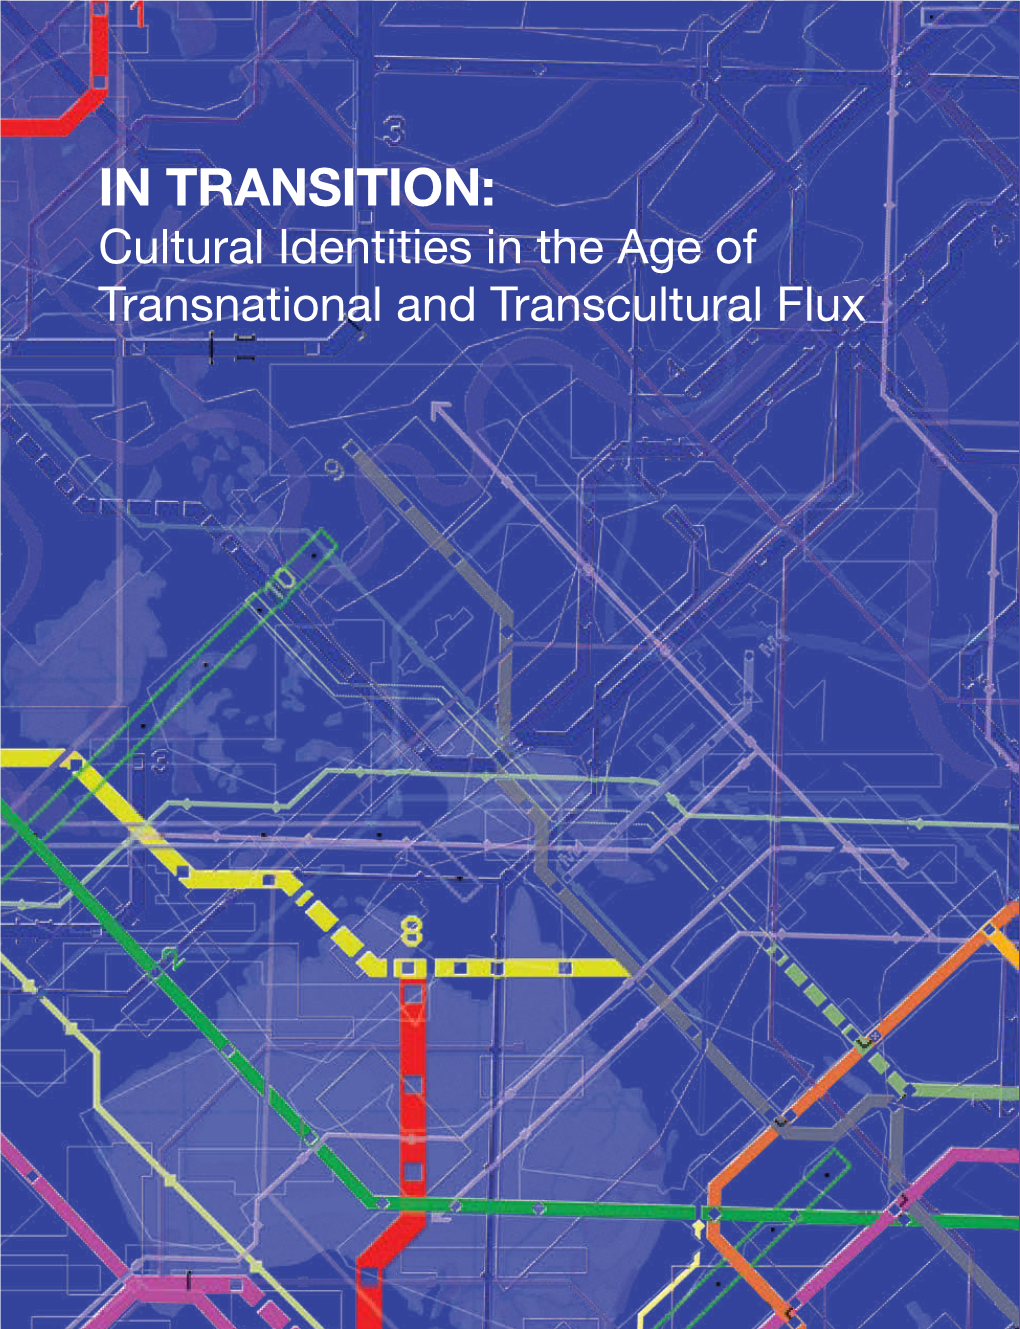 IN TRANSITION: Cultural Identities in the Age of Transnational